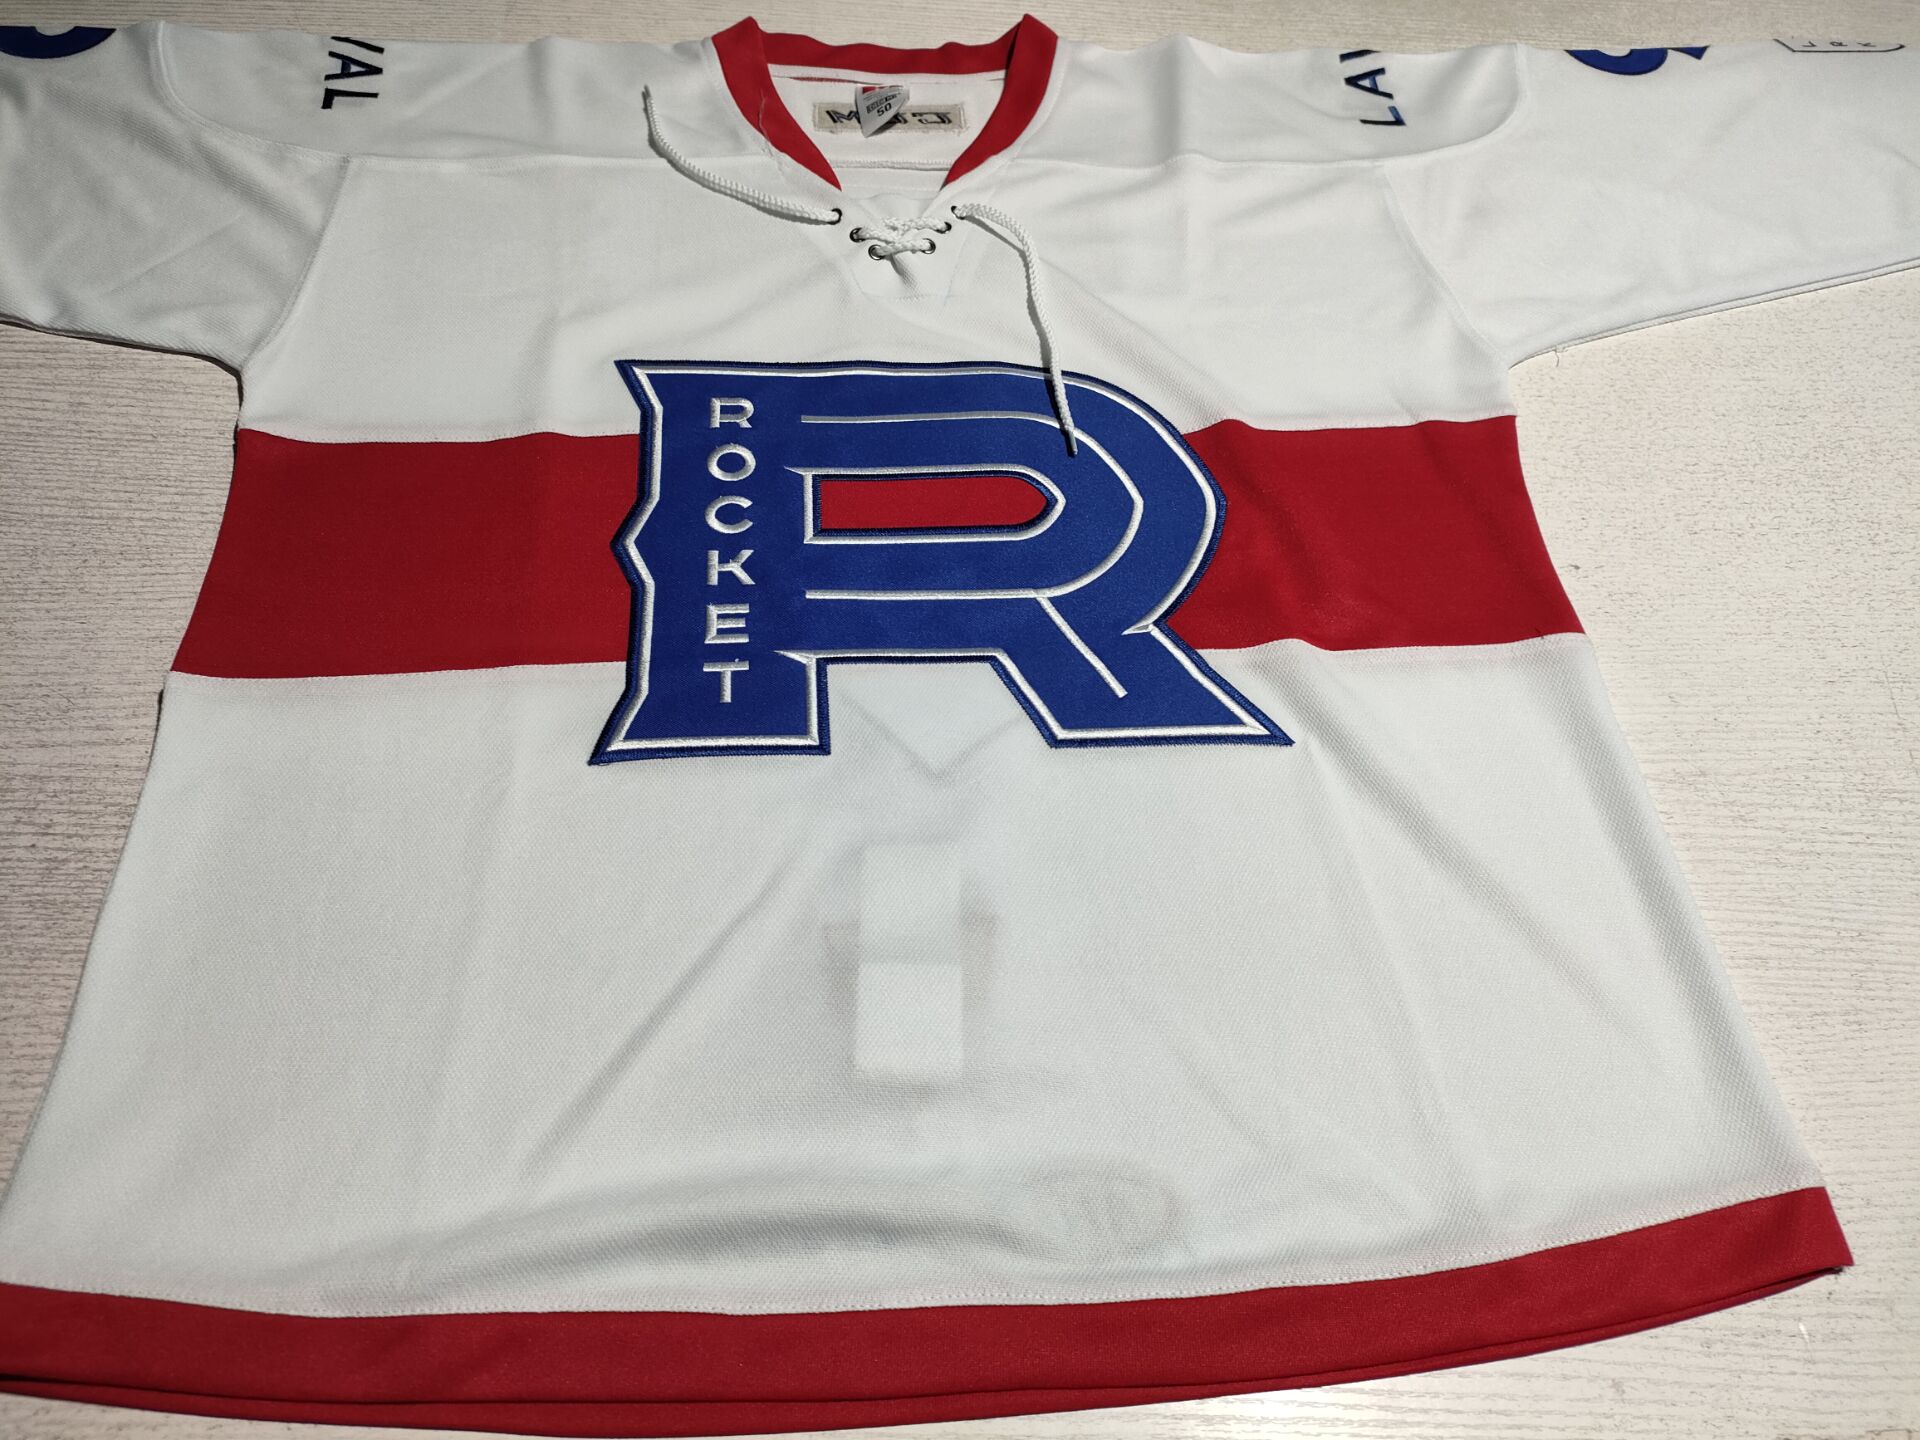 

Jerseys Custom MENs CCM Vintage 9 Richard Laval Rocket Hockey Jersey Stitched Customize any number and name, As